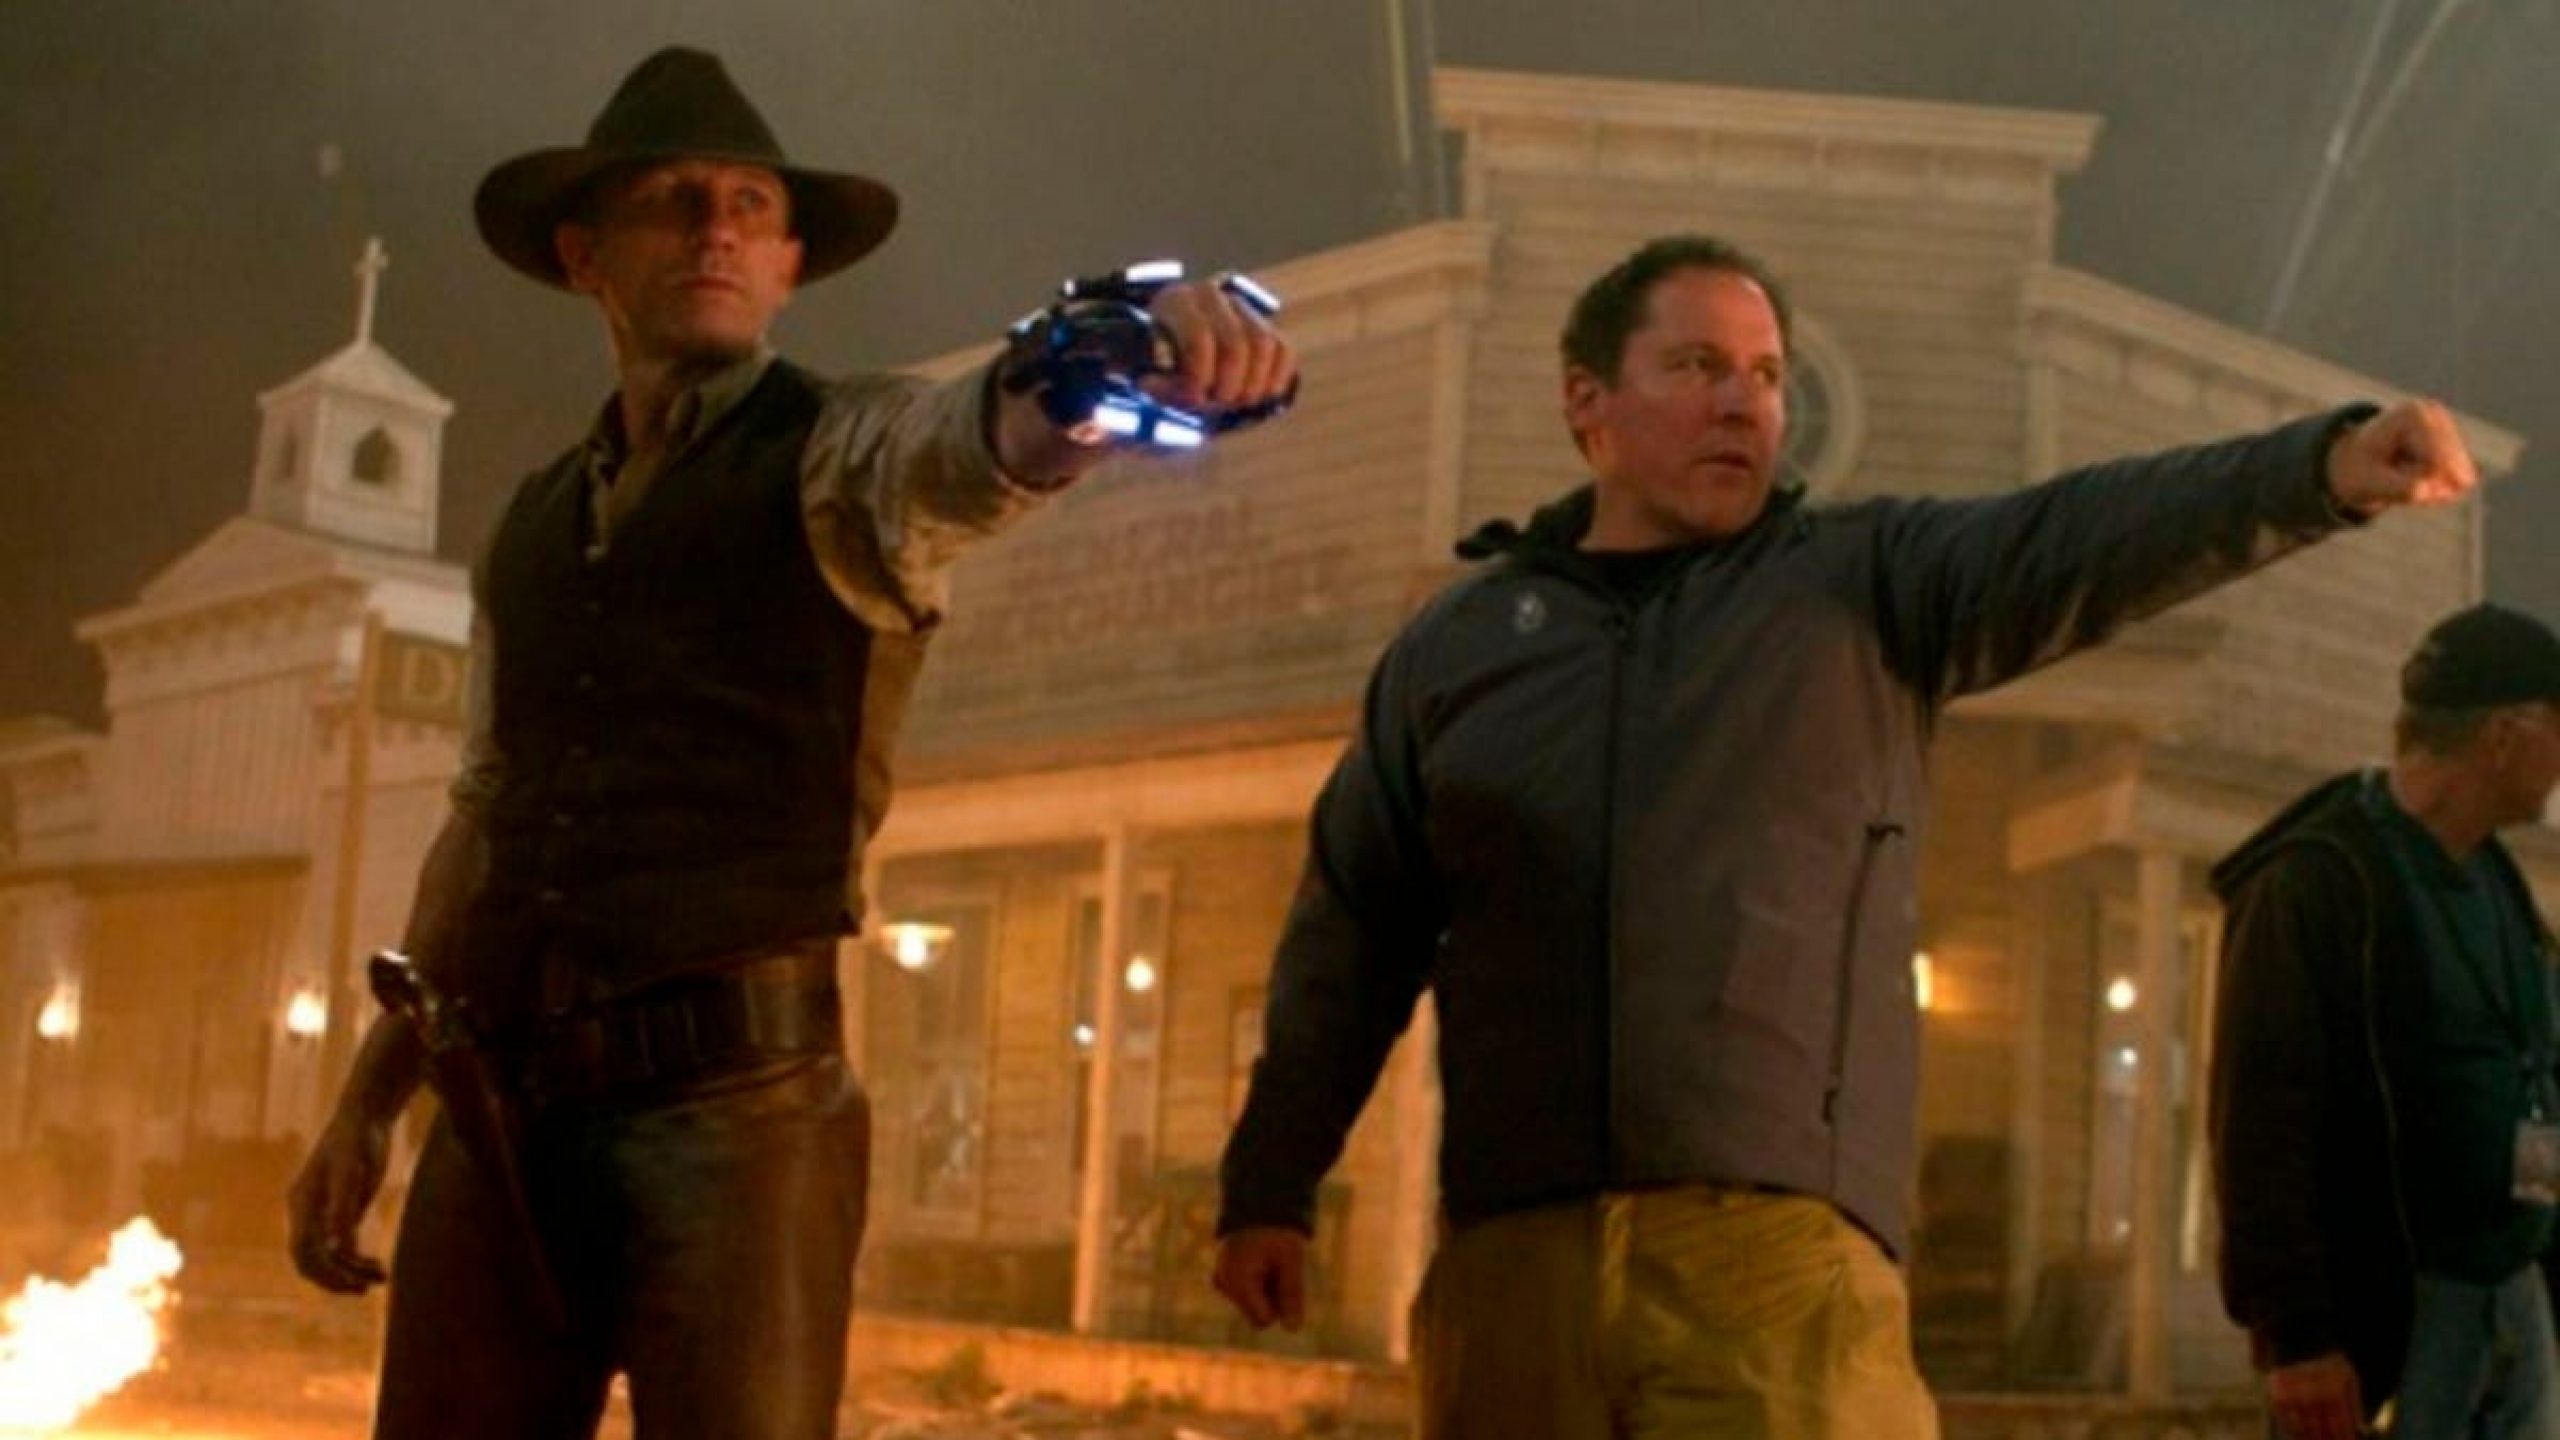 Could Cowboys & Aliens be Making a Cinematic Comeback?